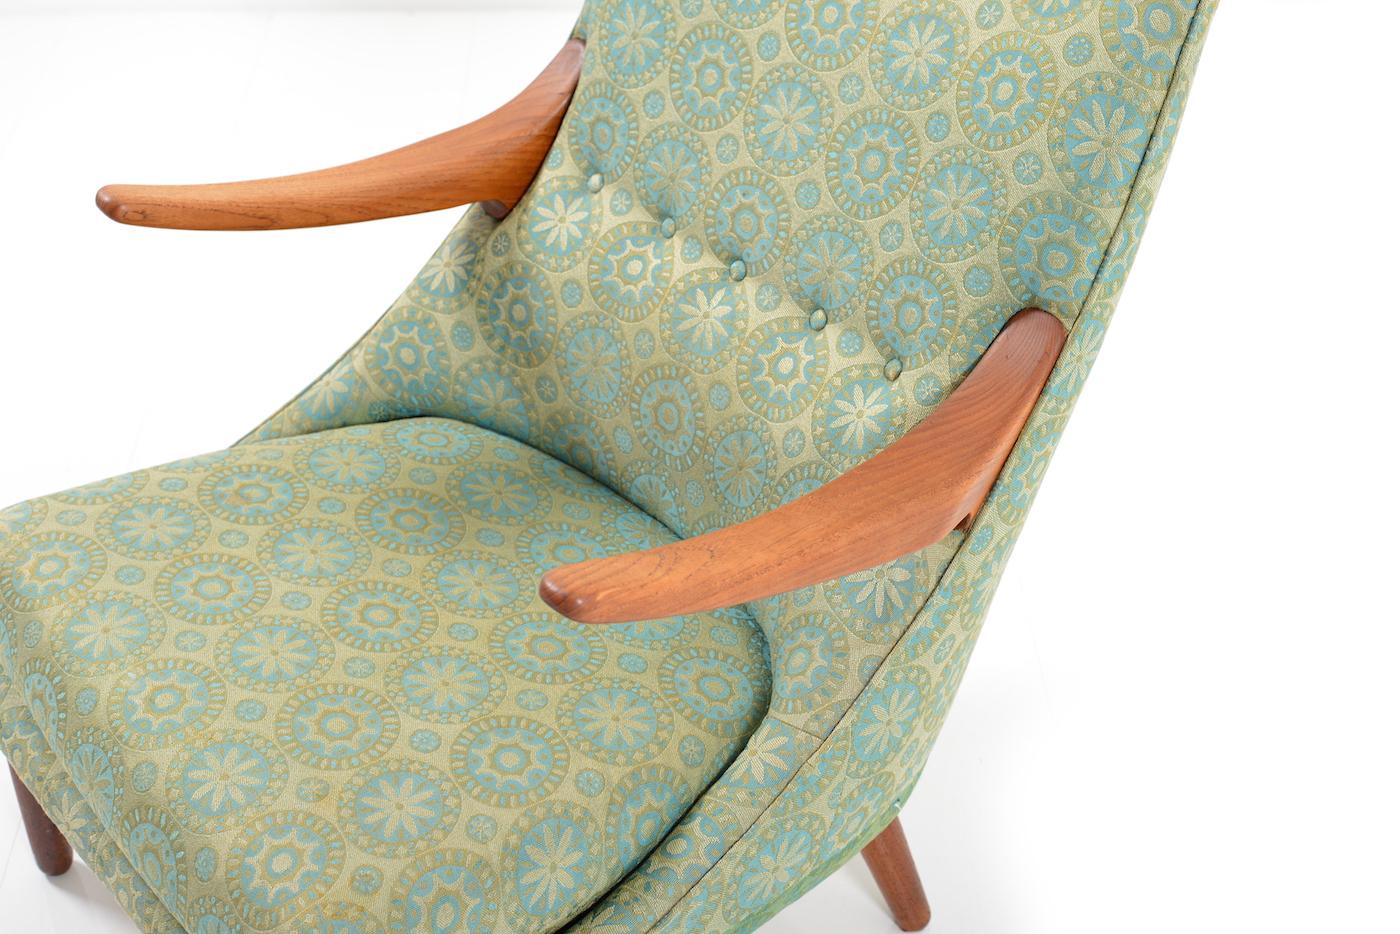 Brocade 1950sPrototype Lounge Chair by Danish Designer and Furniture Maker Svend Skipper For Sale